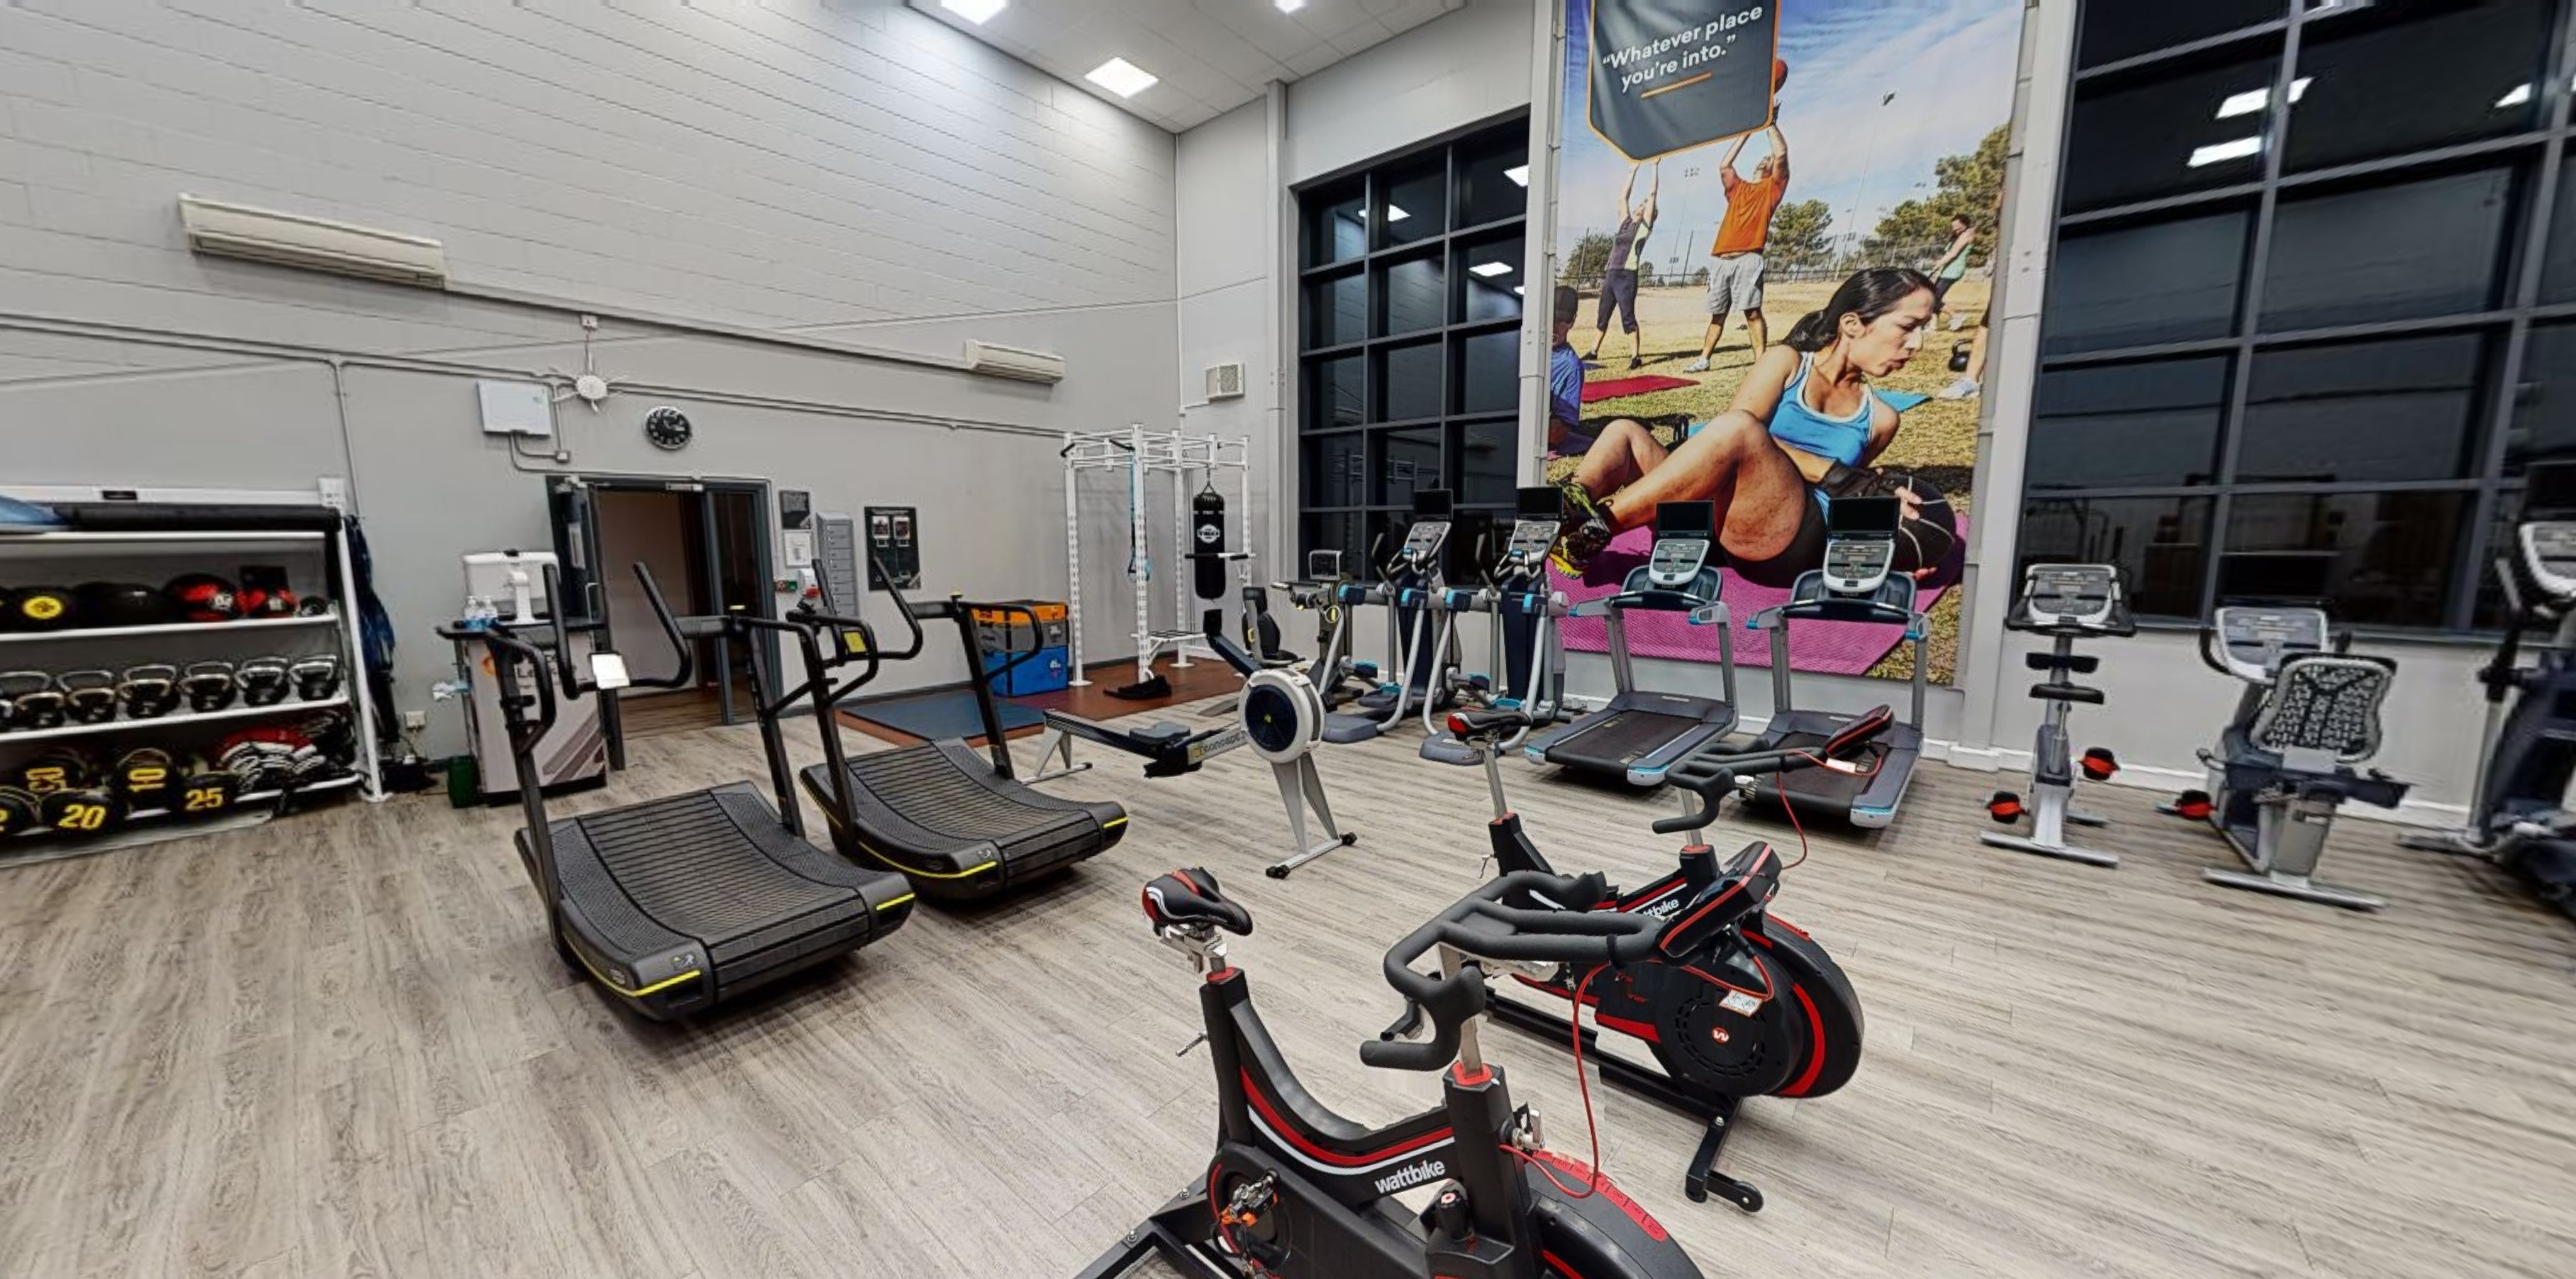 Gym at Arborfield Green Leisure Centre